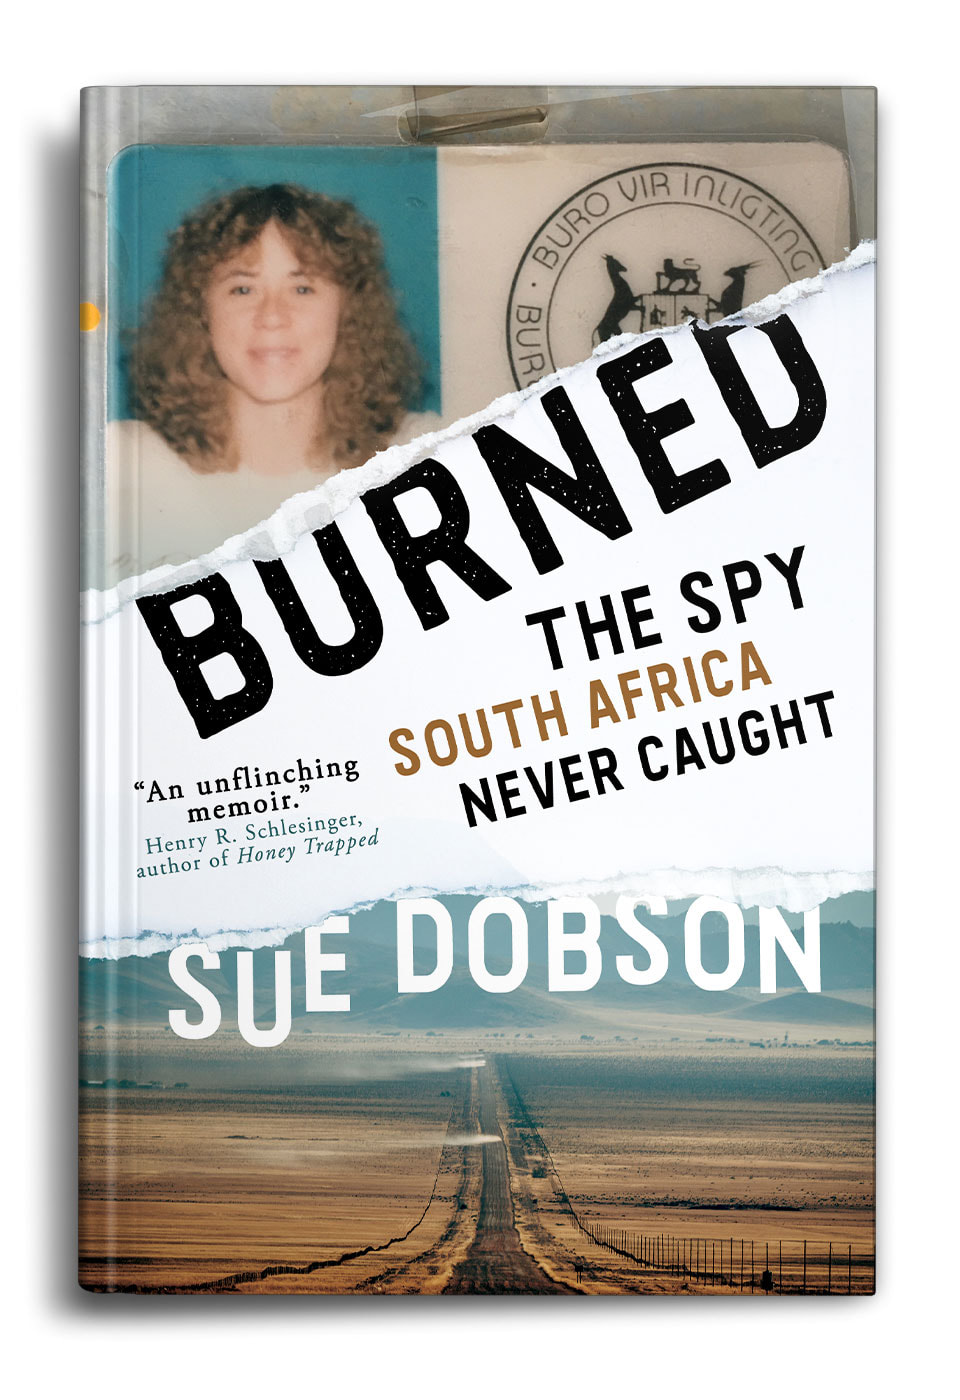 Burned-The-Spy-South-Africa-Never-Caught-By-Sue-Dobson